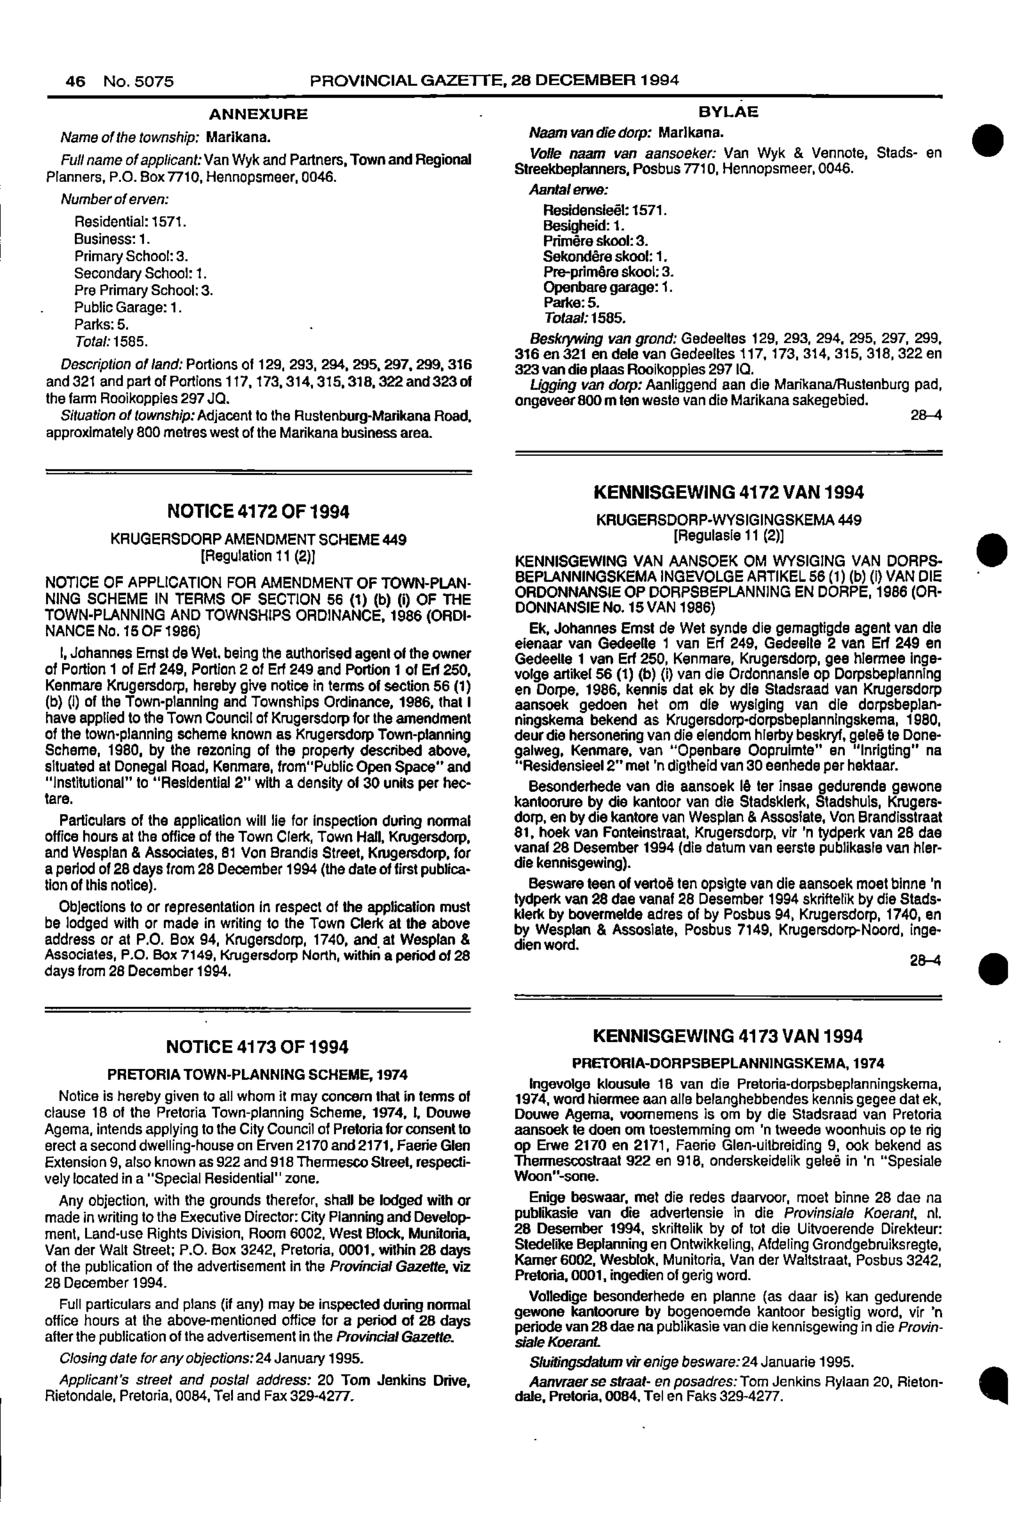 46 No 5075 PROVINCIAL GAZETTE, 28 DECEMBER 1994 ANNEXURE Name of the township: Marikana Full name of applicant: Van Wyk and Partners, Town and Regional Planners, PO Box 7710, Hennopsmeer, 0046 BYLAE